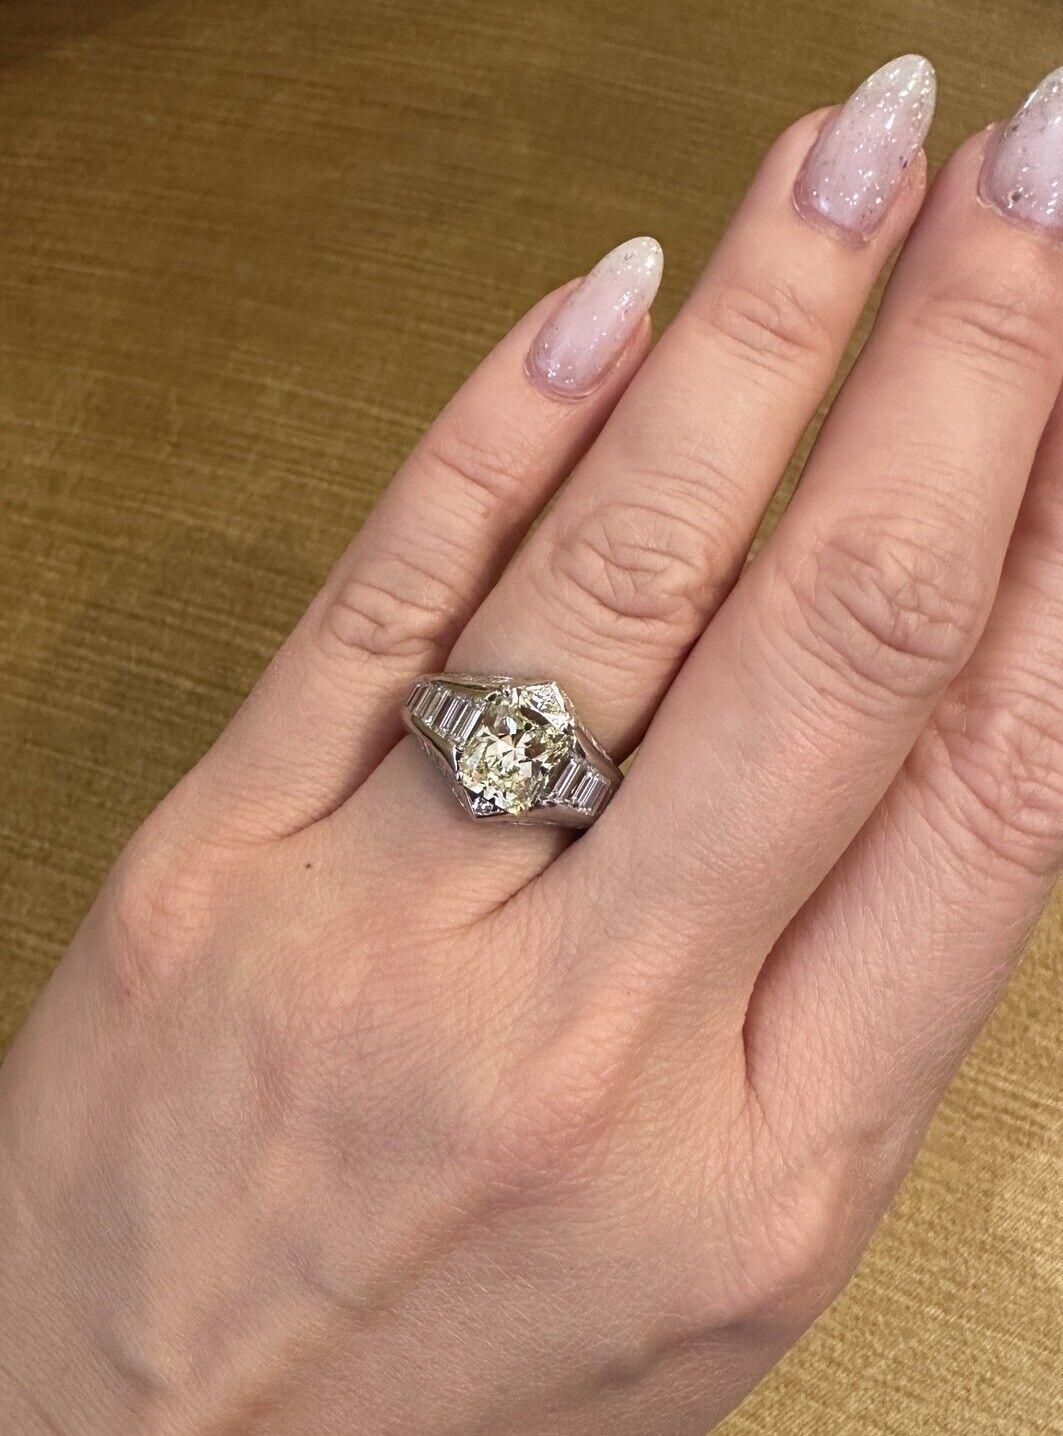 Radiant Cut Diamond Ring with Baguettes in Platinum

Radiant Diamond Ring features a natural light yellow color Center Radiant Cut Diamond with Baguette Diamonds channel set on three sides in Platinum.

Center Diamond weight is 2.77 carats.
The